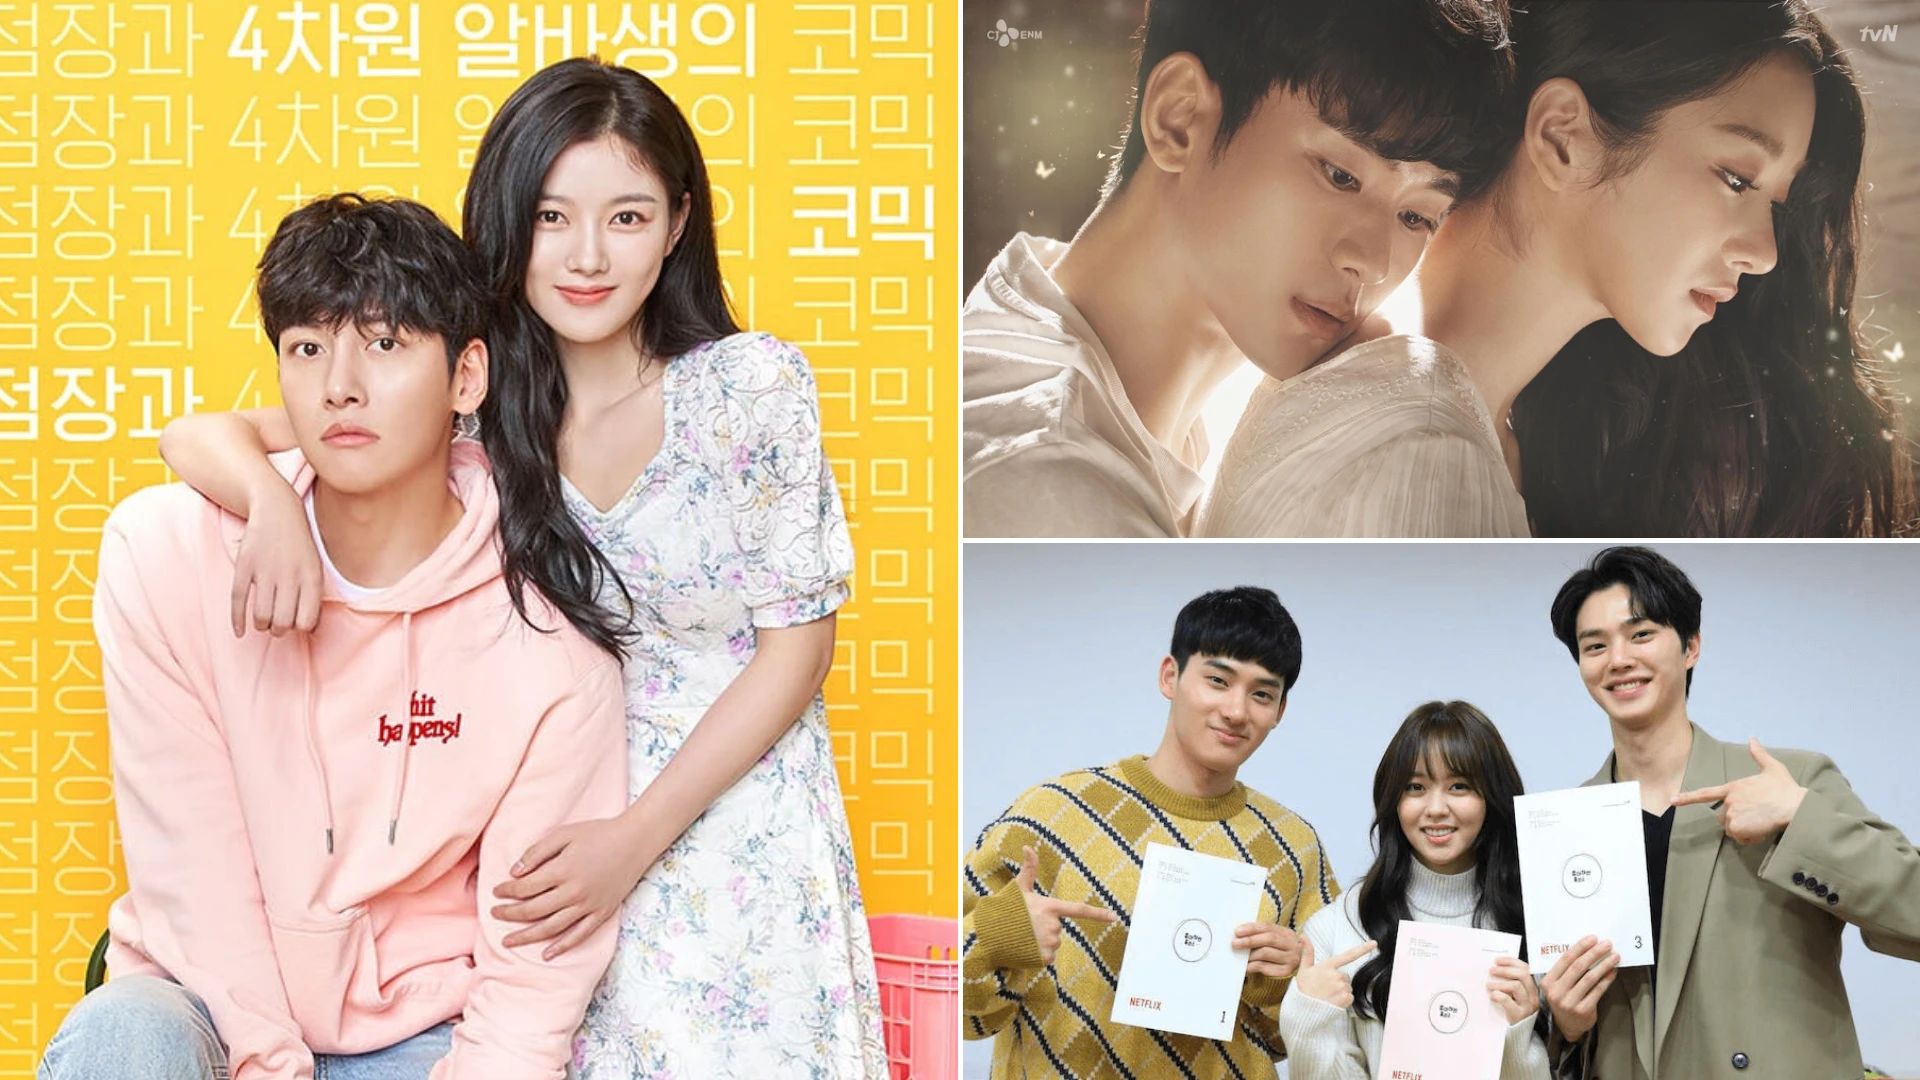 Best Korean Dramas and Movies on Netflix to Watch Right Now